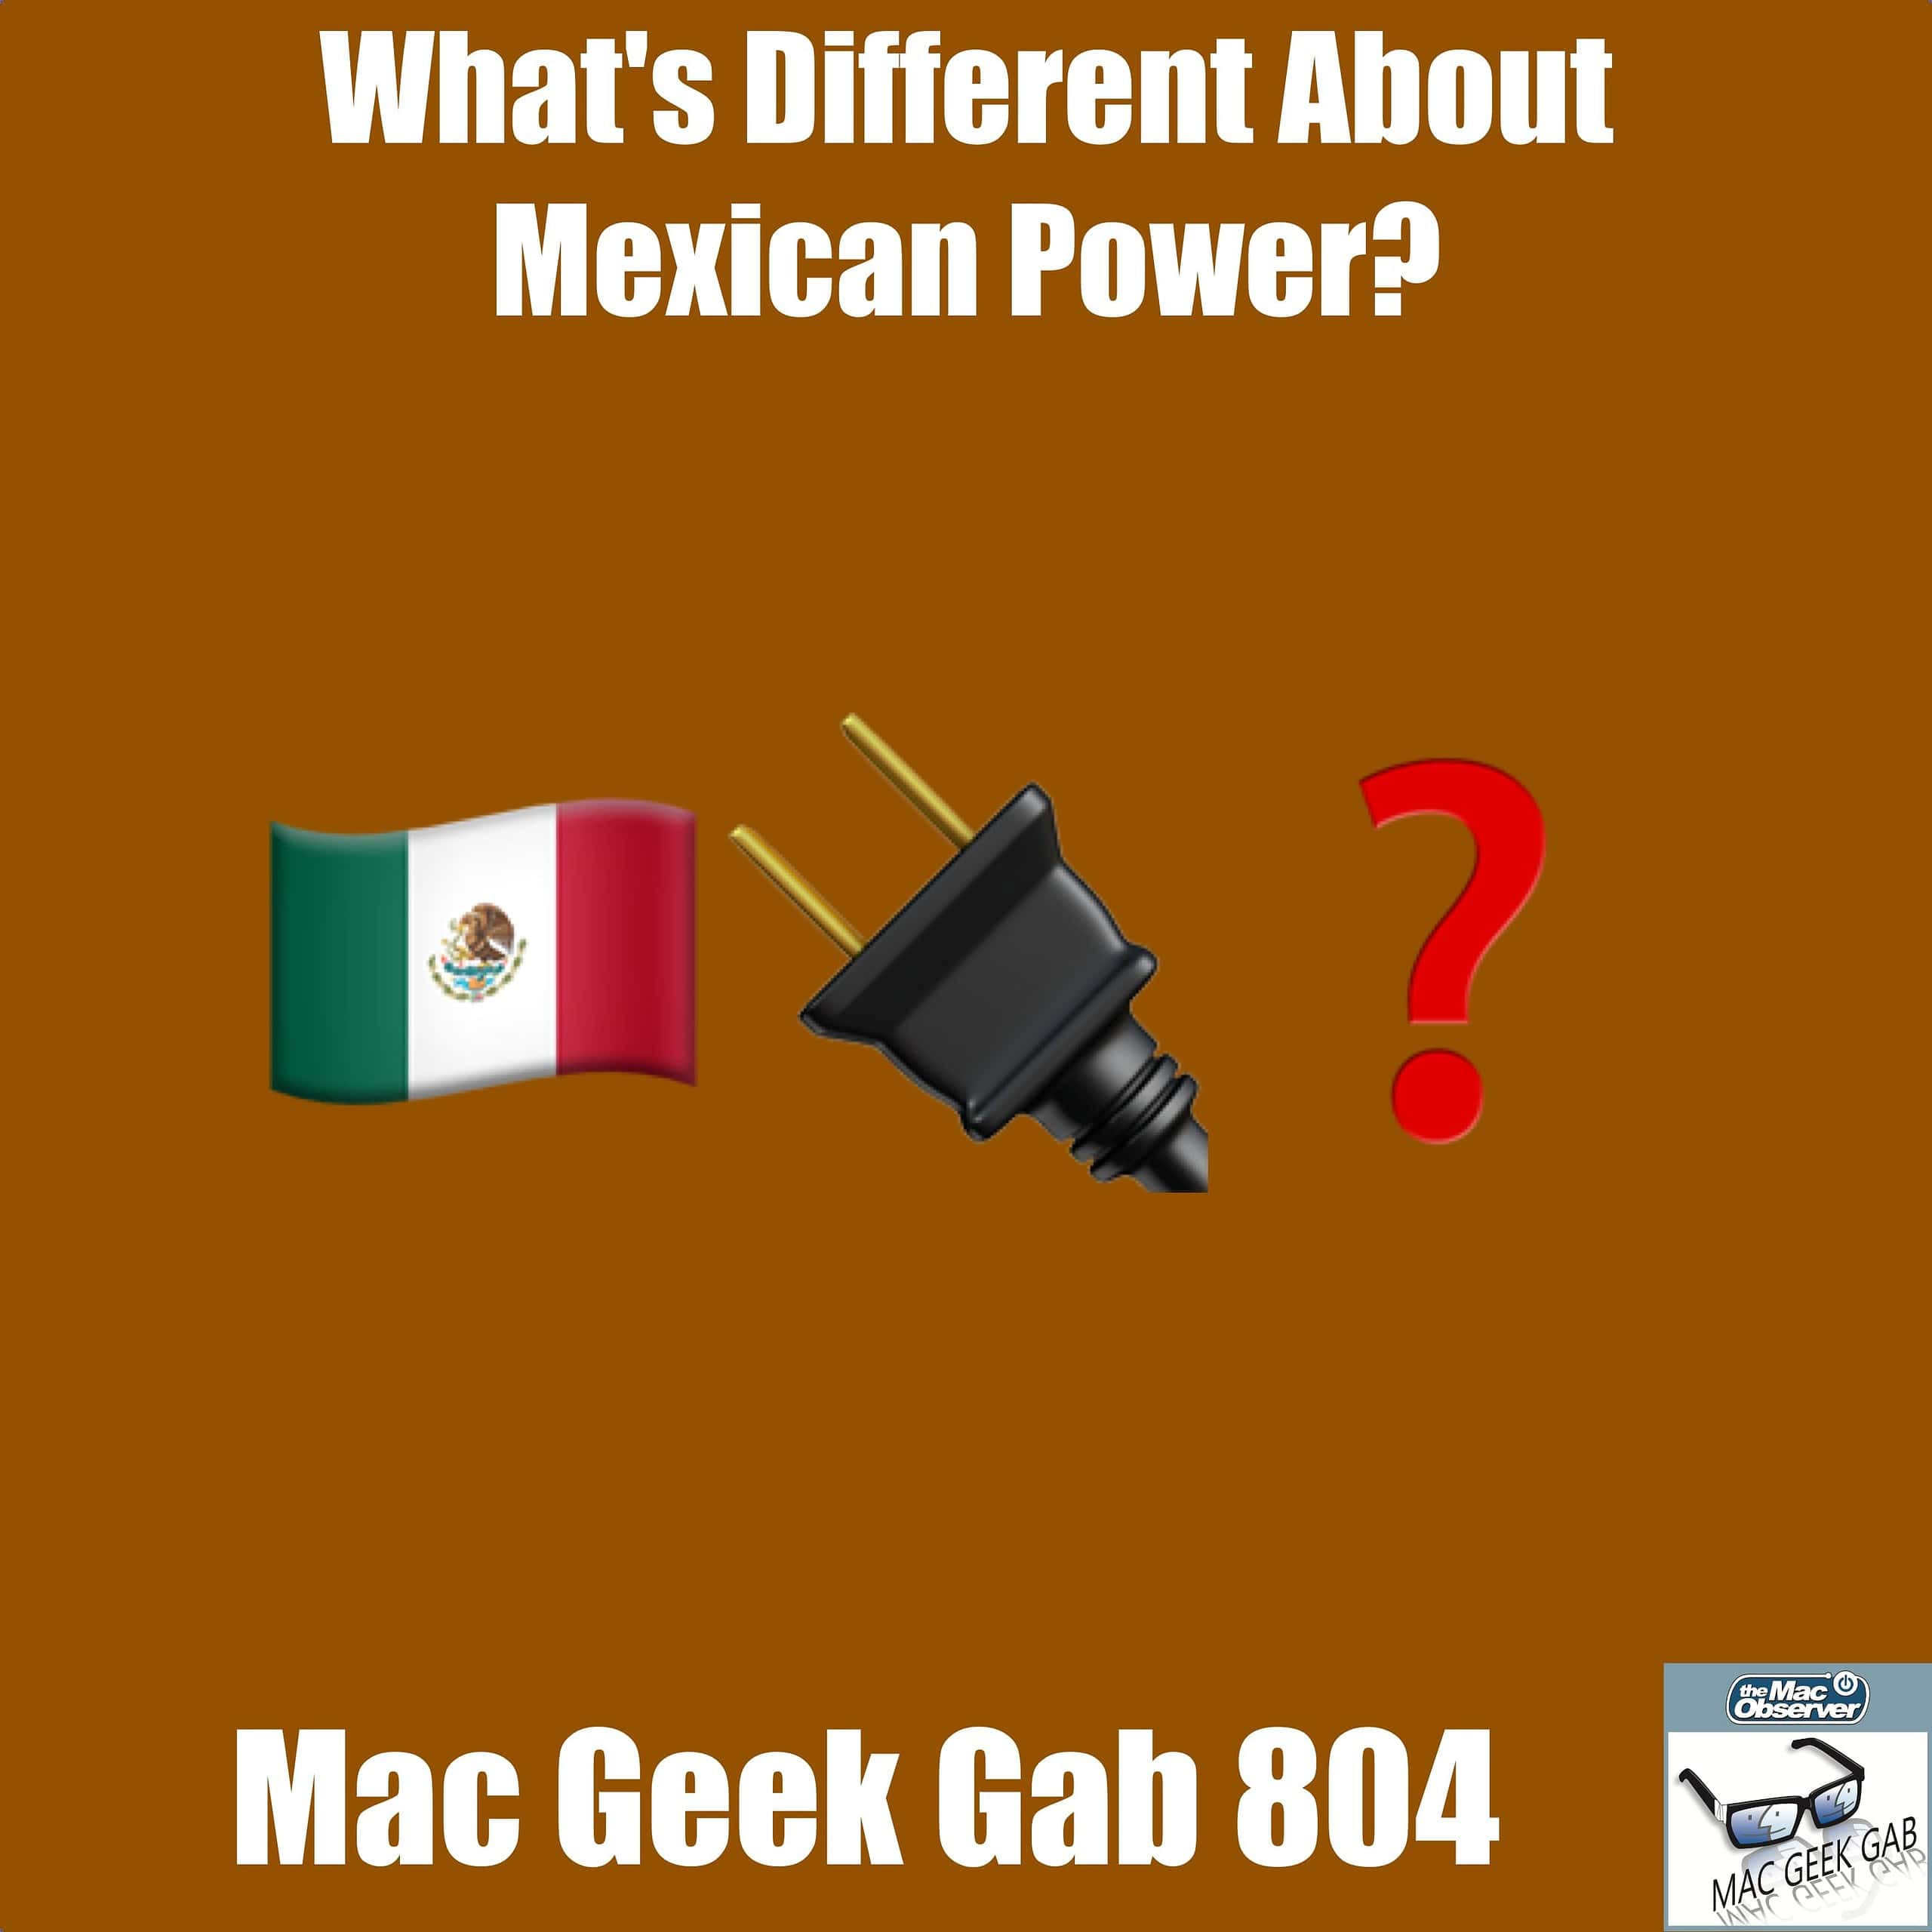 What’s Different About Mexican Power? – Mac Geek Gab 804